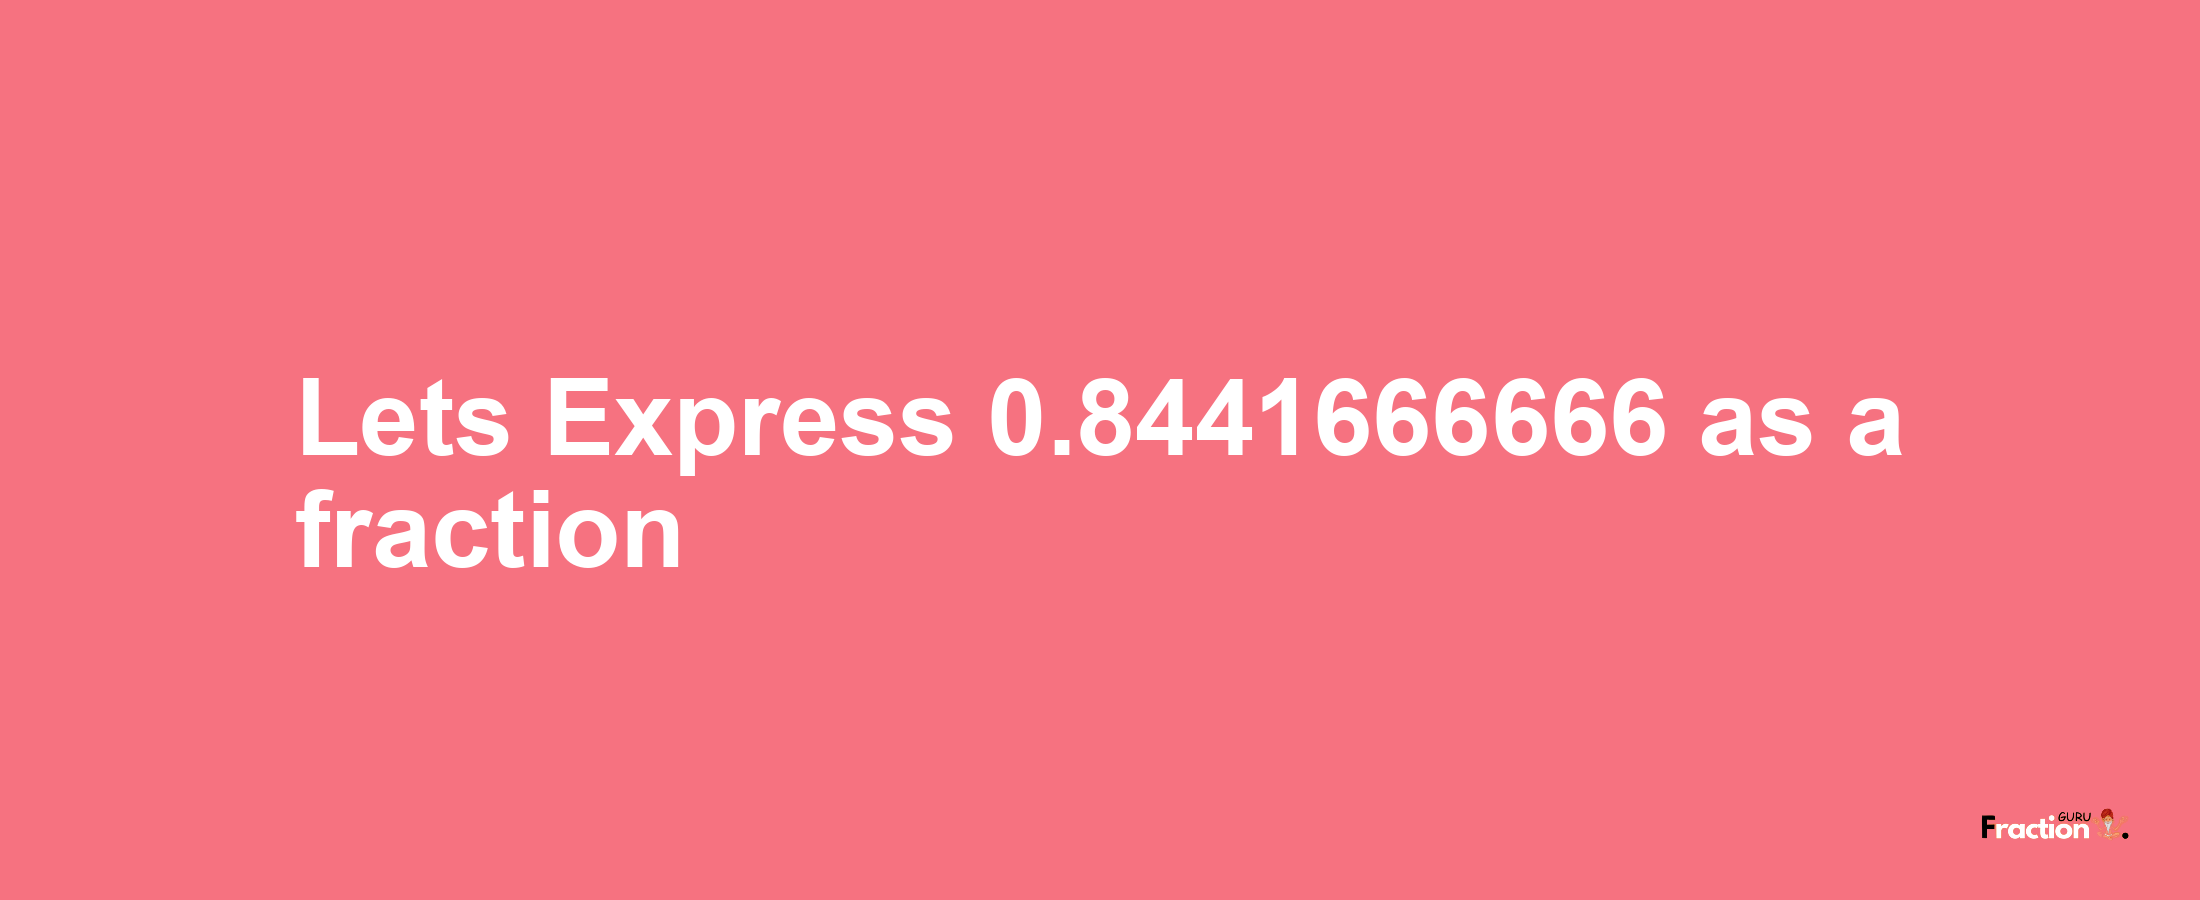 Lets Express 0.8441666666 as afraction